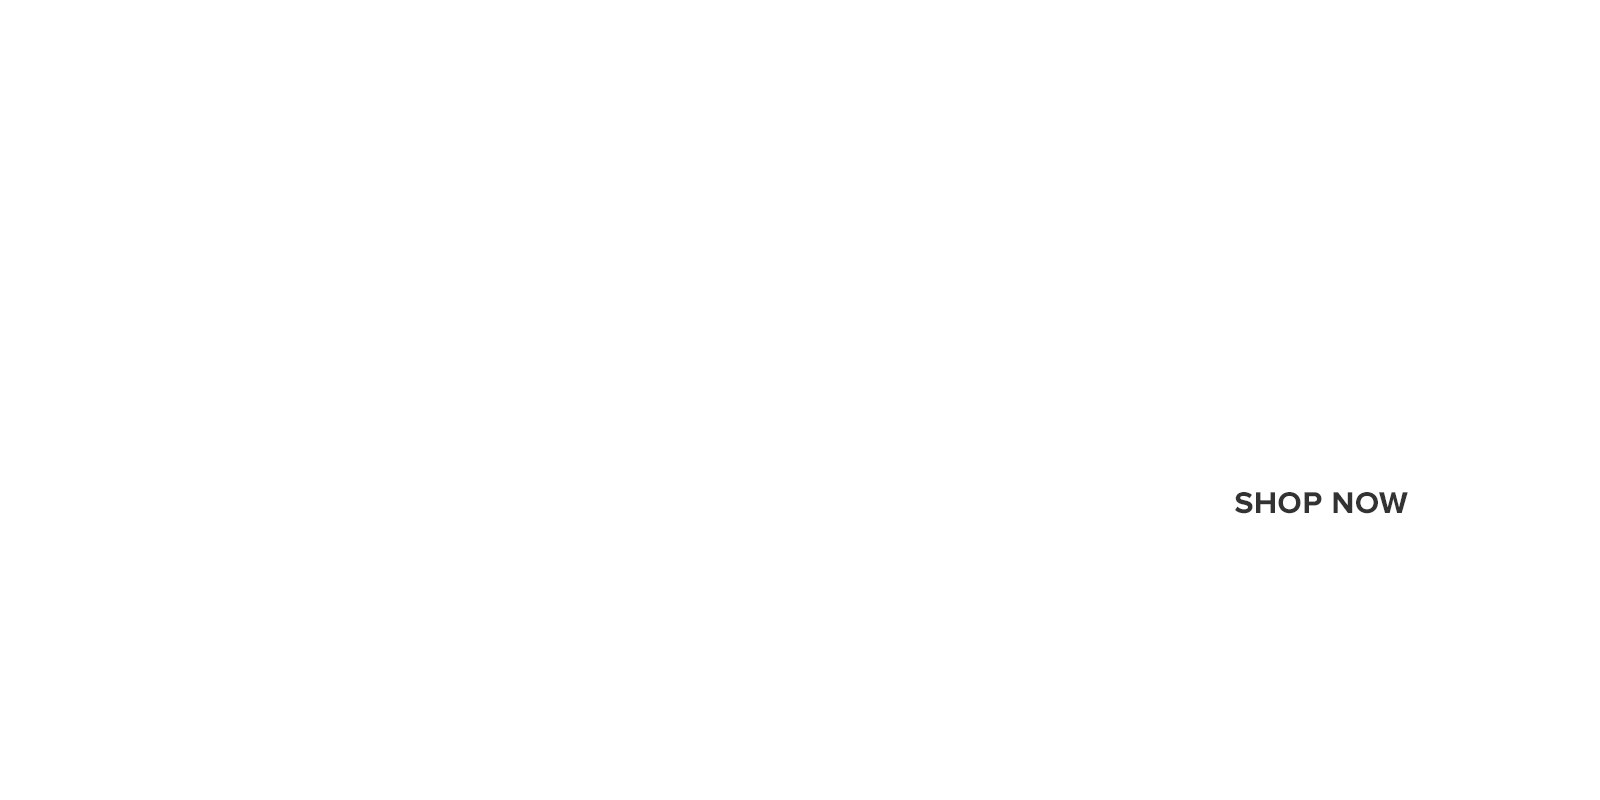 25% off active sitting with code dotdsitting